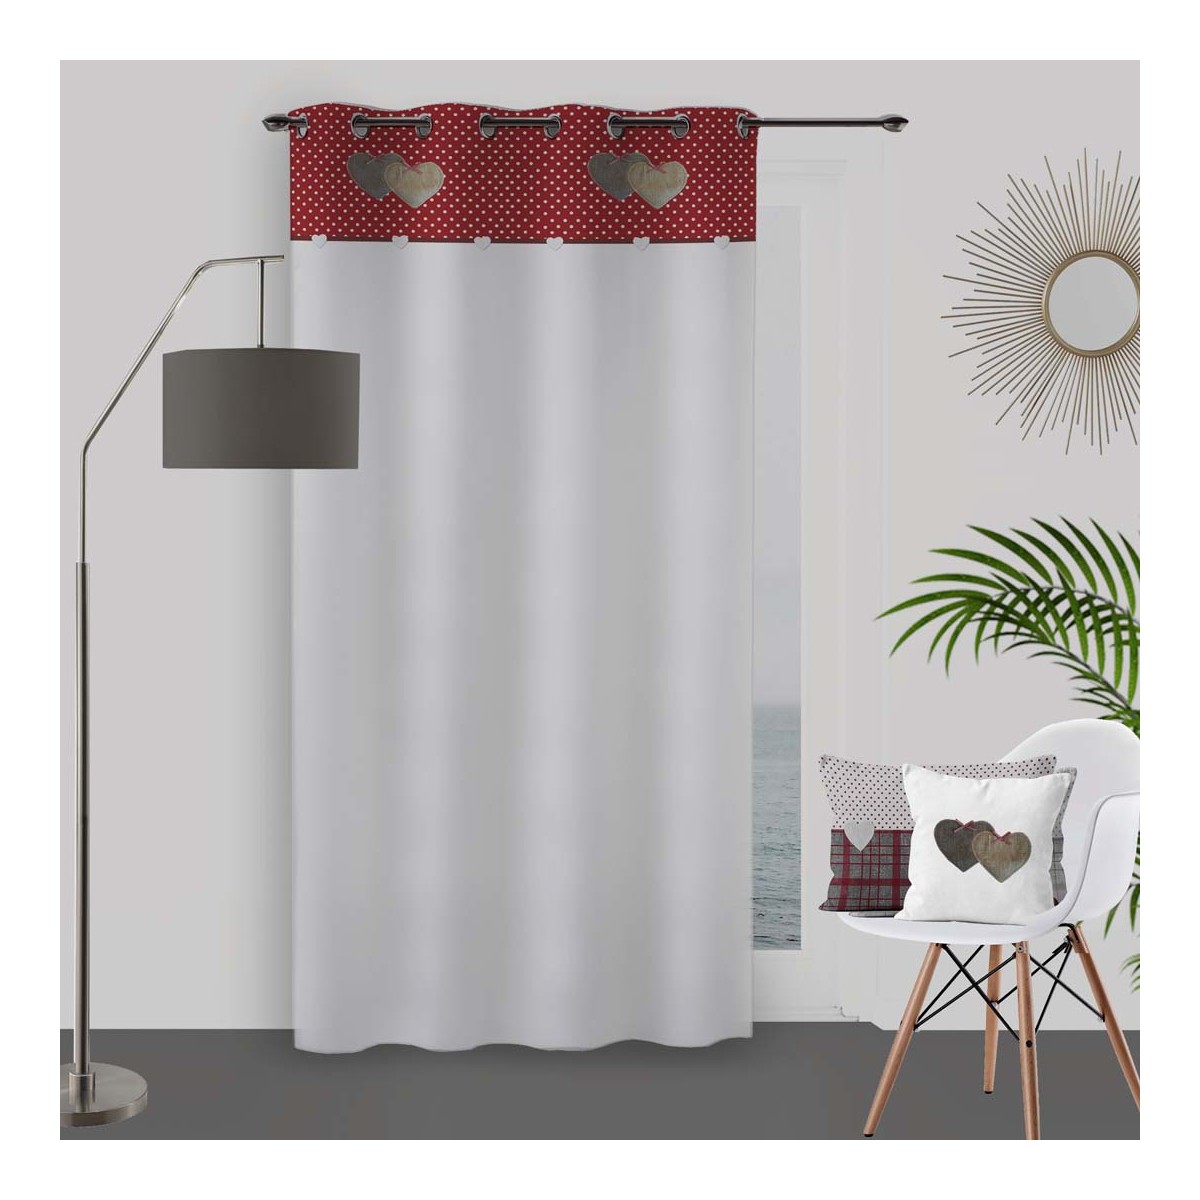 Home Curtains & blinds Soleil D'Ocre LOVE Red